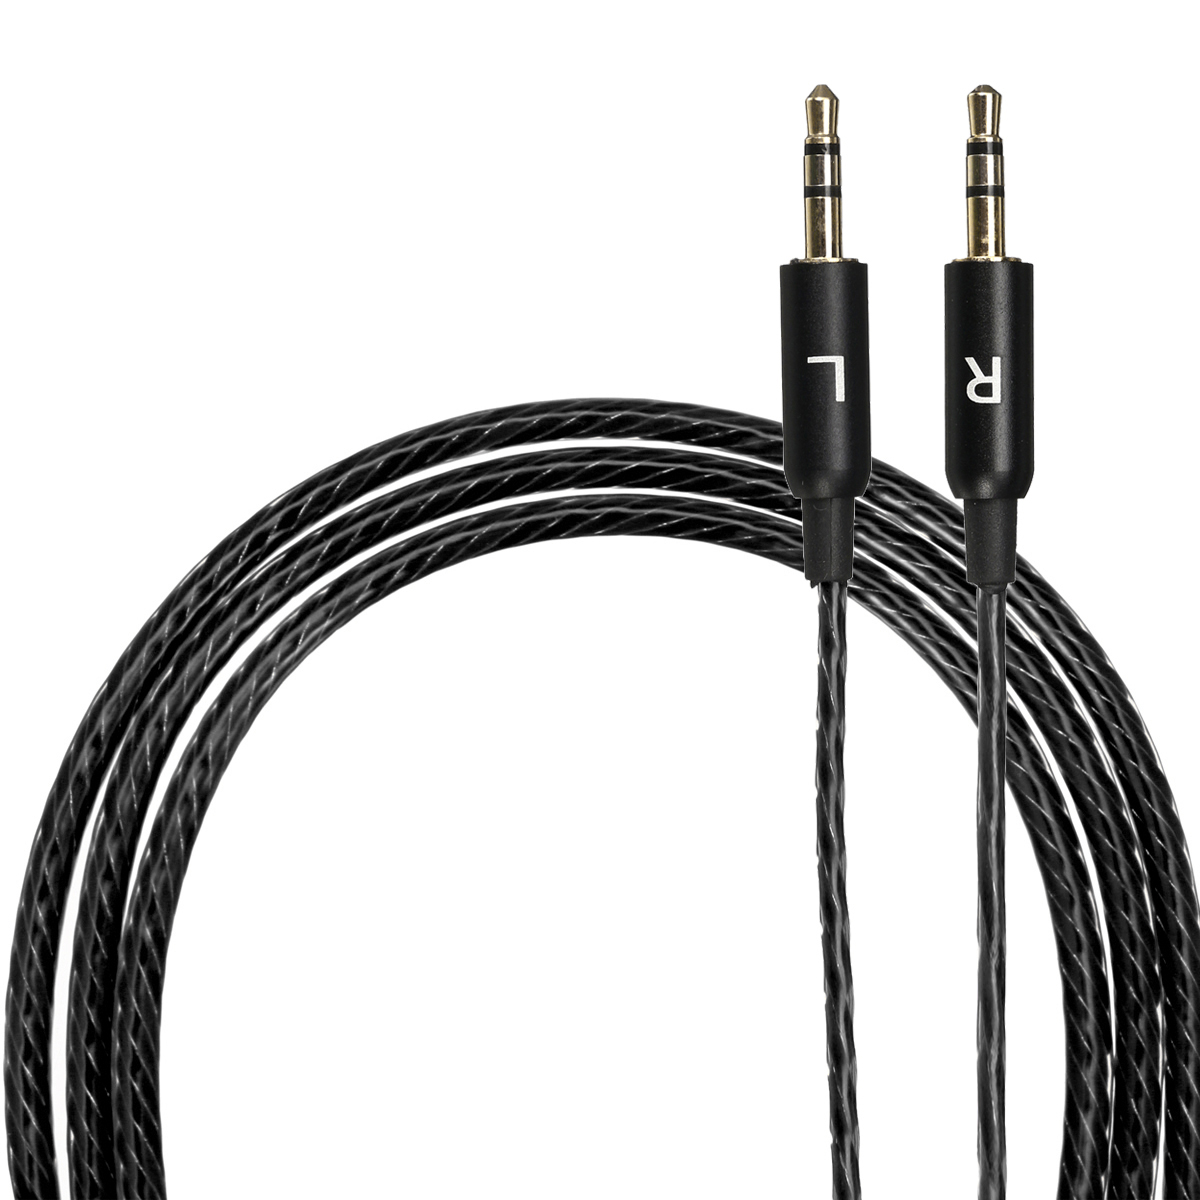 Replacement-Nylon-Flexural-12m-Audio-Cable-with-Microphone-for-Sol-Republic-Master-Tracks-HD-V8-V10--1460109-4